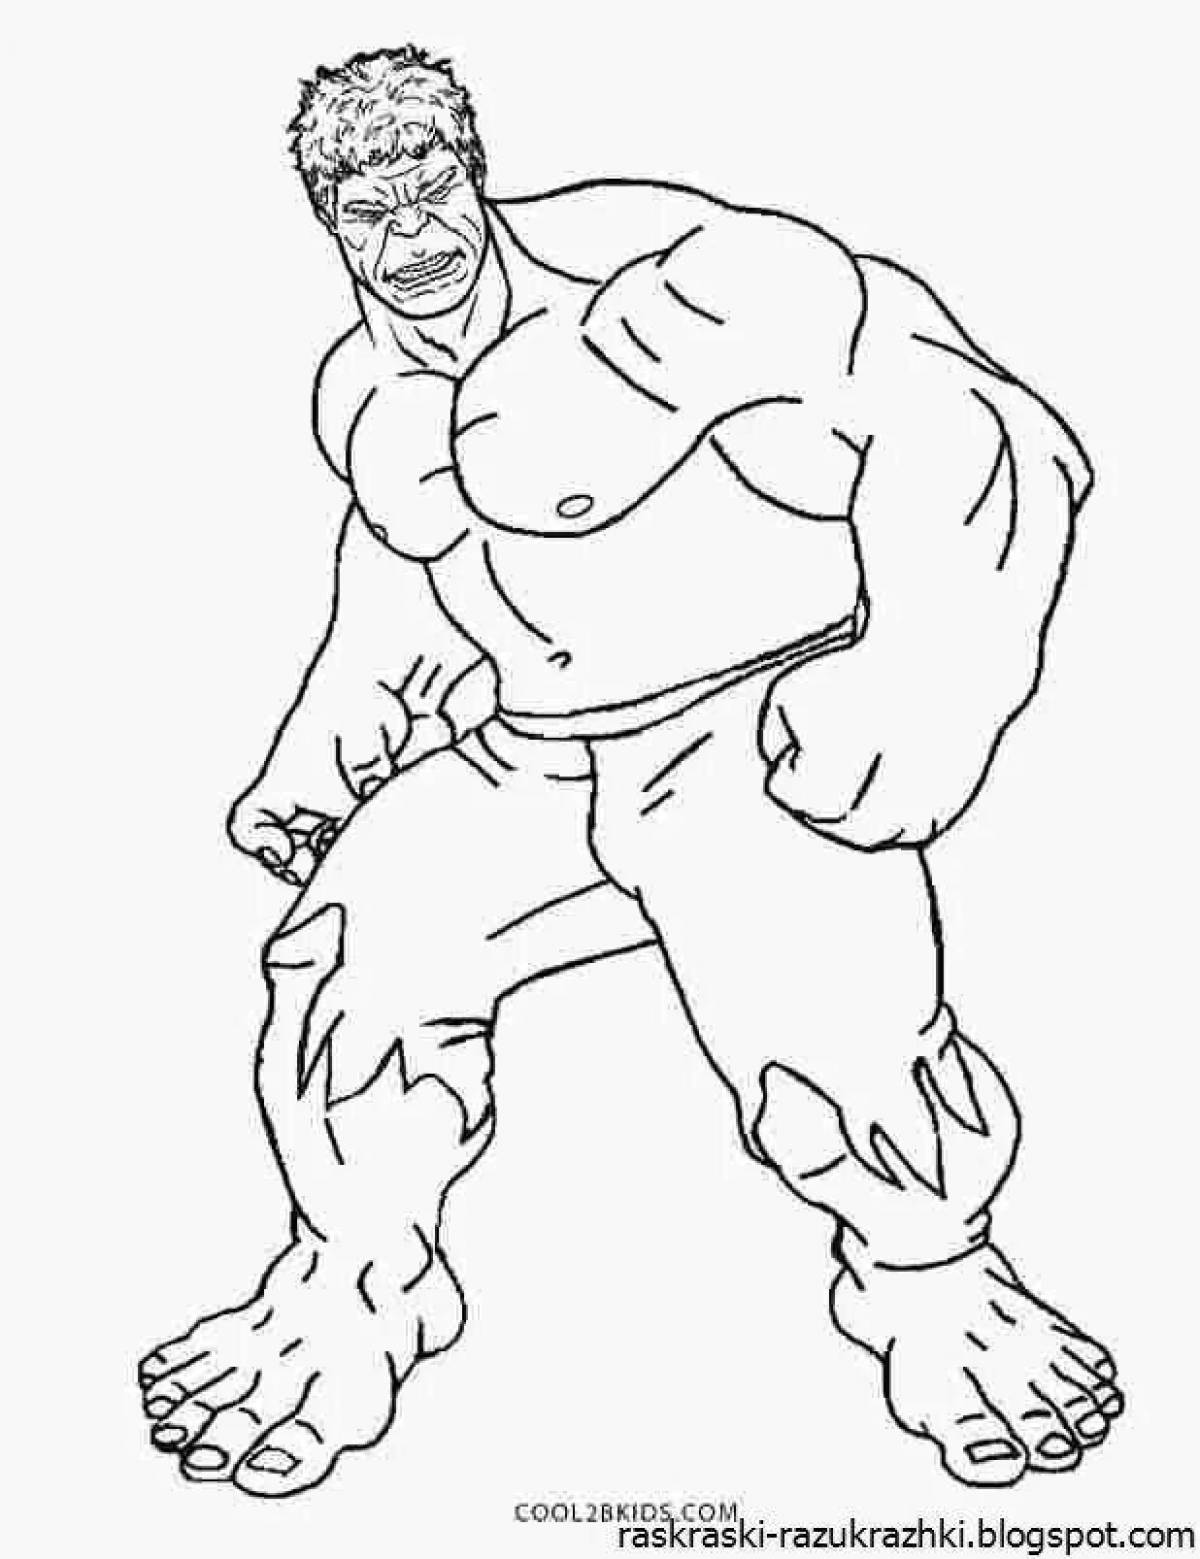 Adorable hulk coloring book for kids 6-7 years old